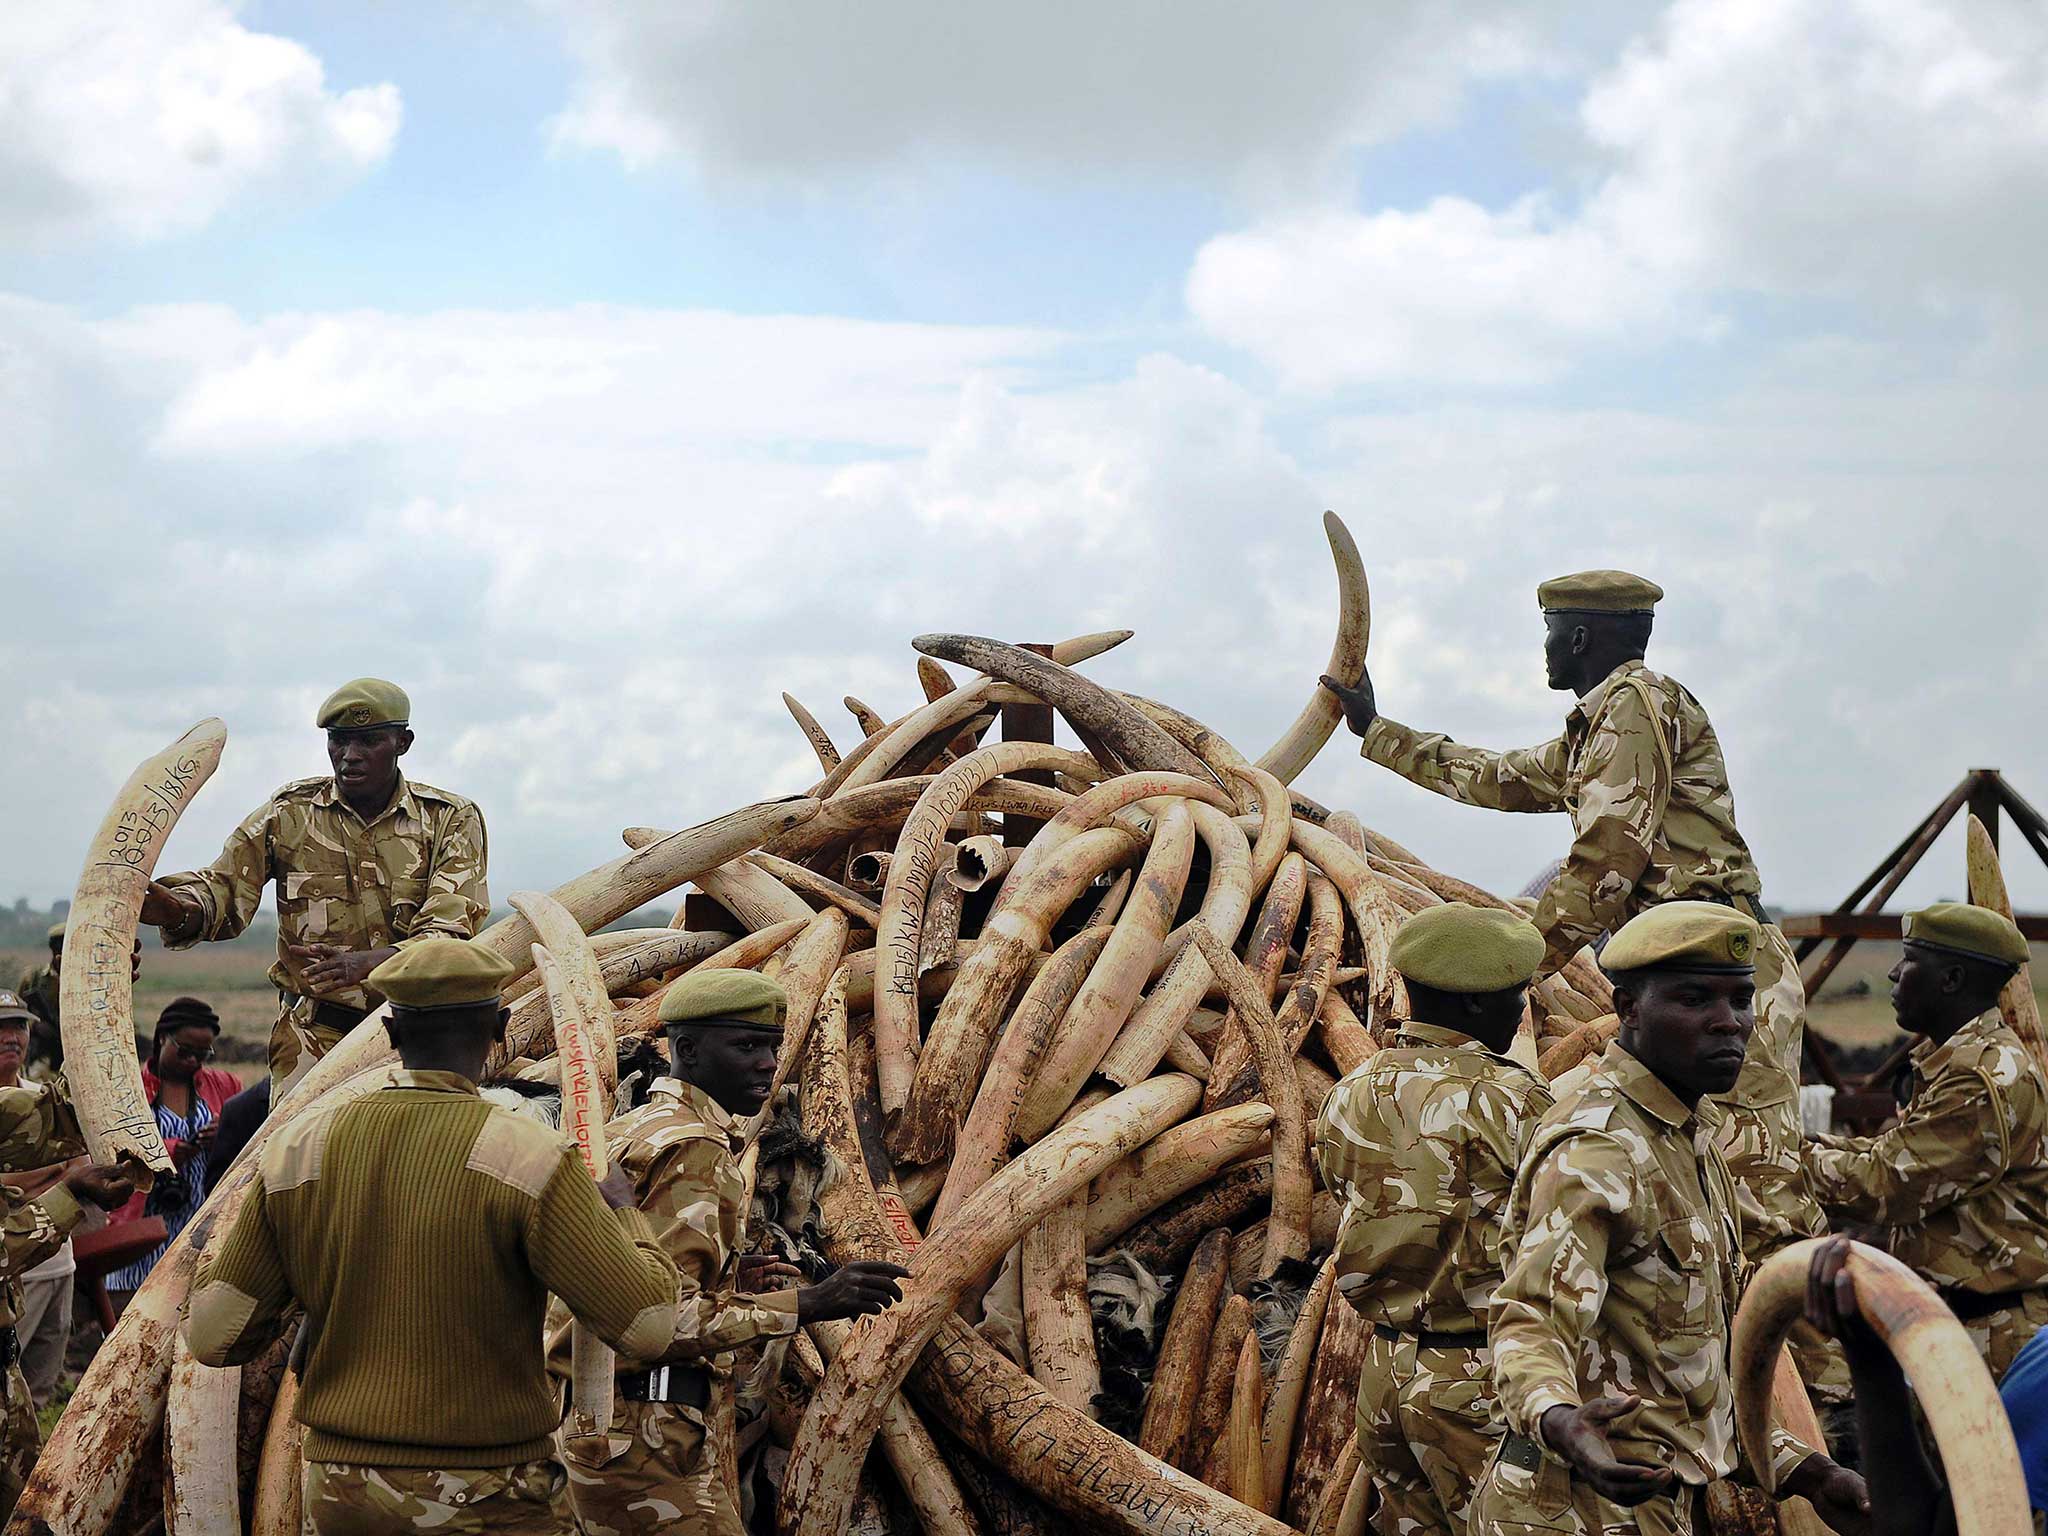 Kenya Wildlife Services rangers pile up elephant ivory onto a pyre. On the 30th April 2016 they burned approximately 105 tonnes of confiscated ivory